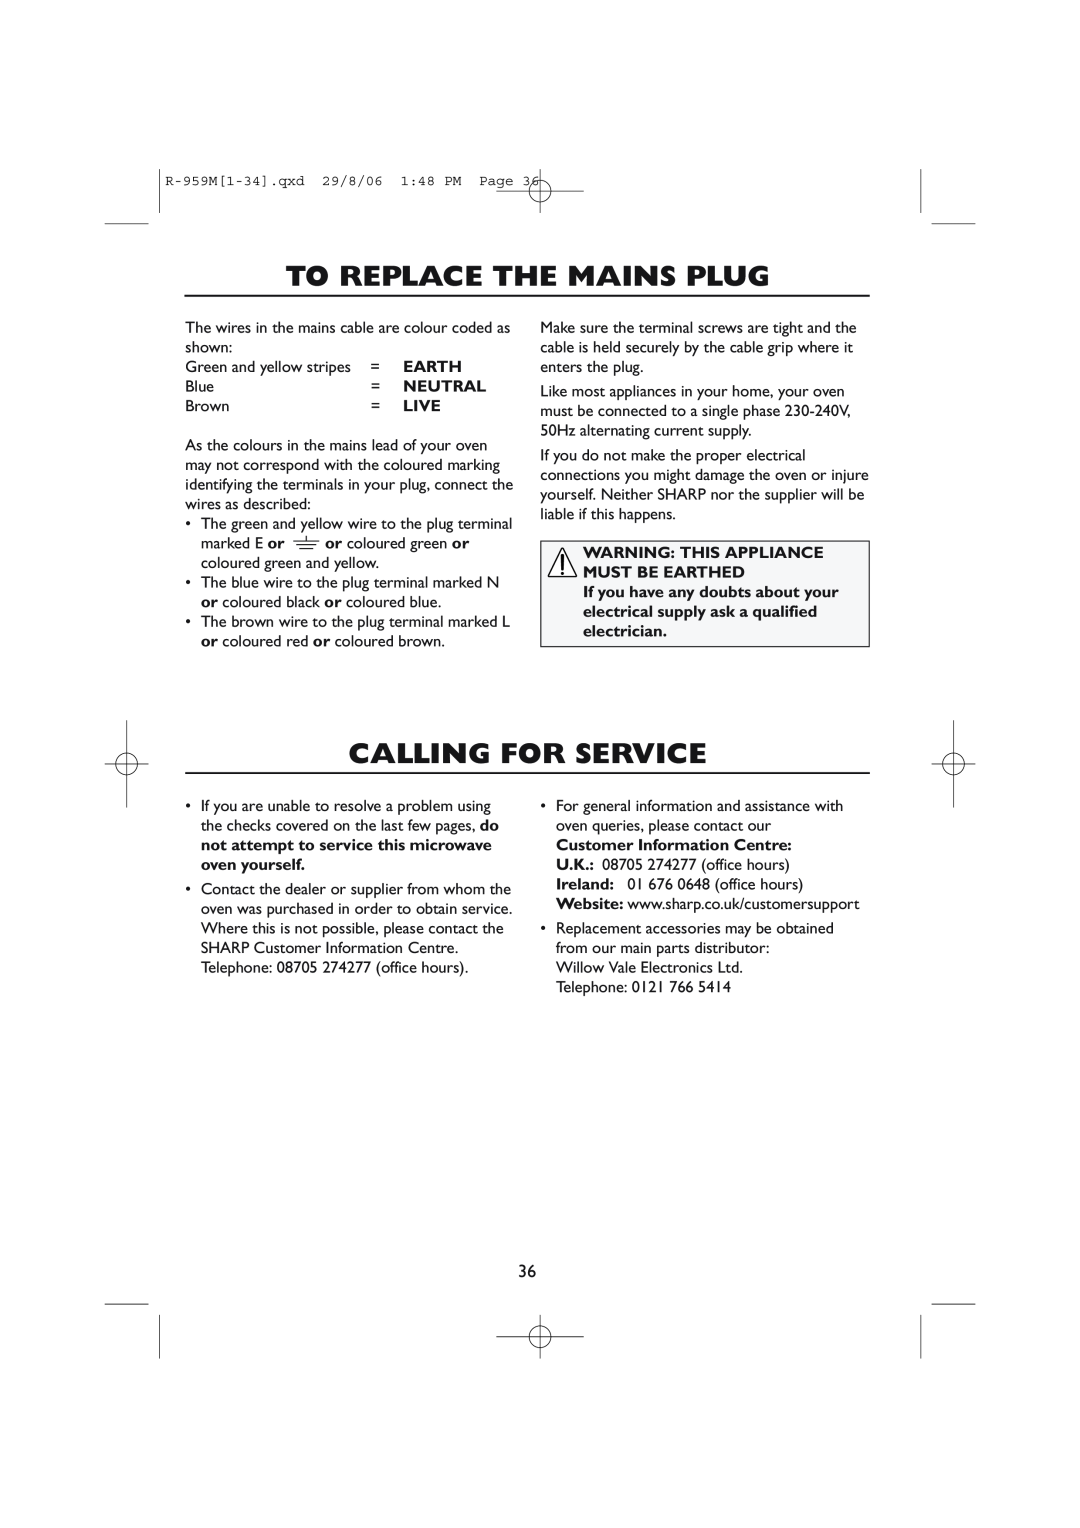 Sharp R-98STM-A, R-959M operation manual To Replace The Mains Plug, Calling For Service, Earth, Neutral, Live 